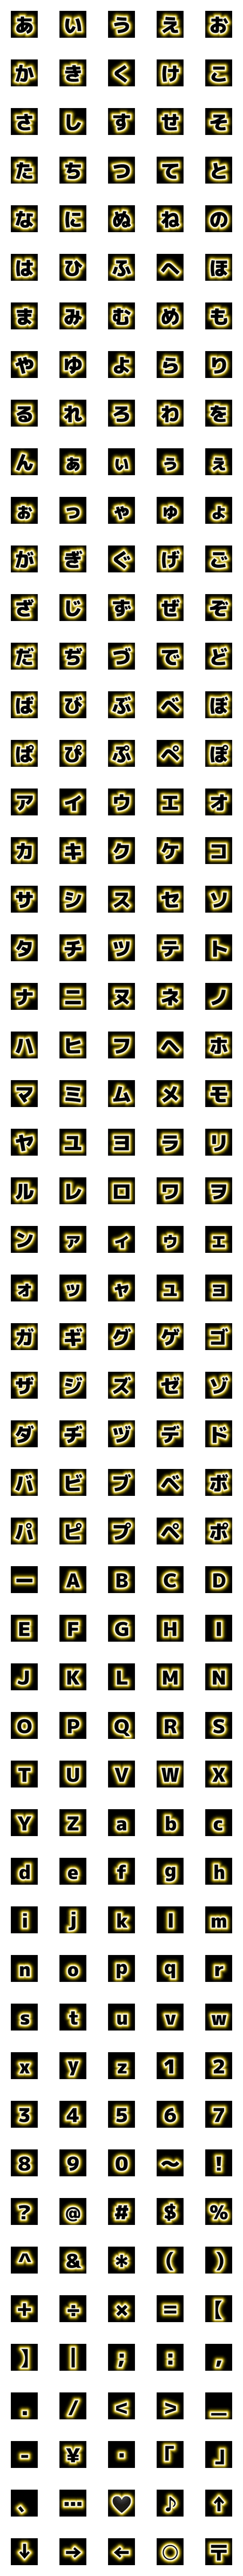 [LINE絵文字]黒 光 絵文字 ブラックの画像一覧